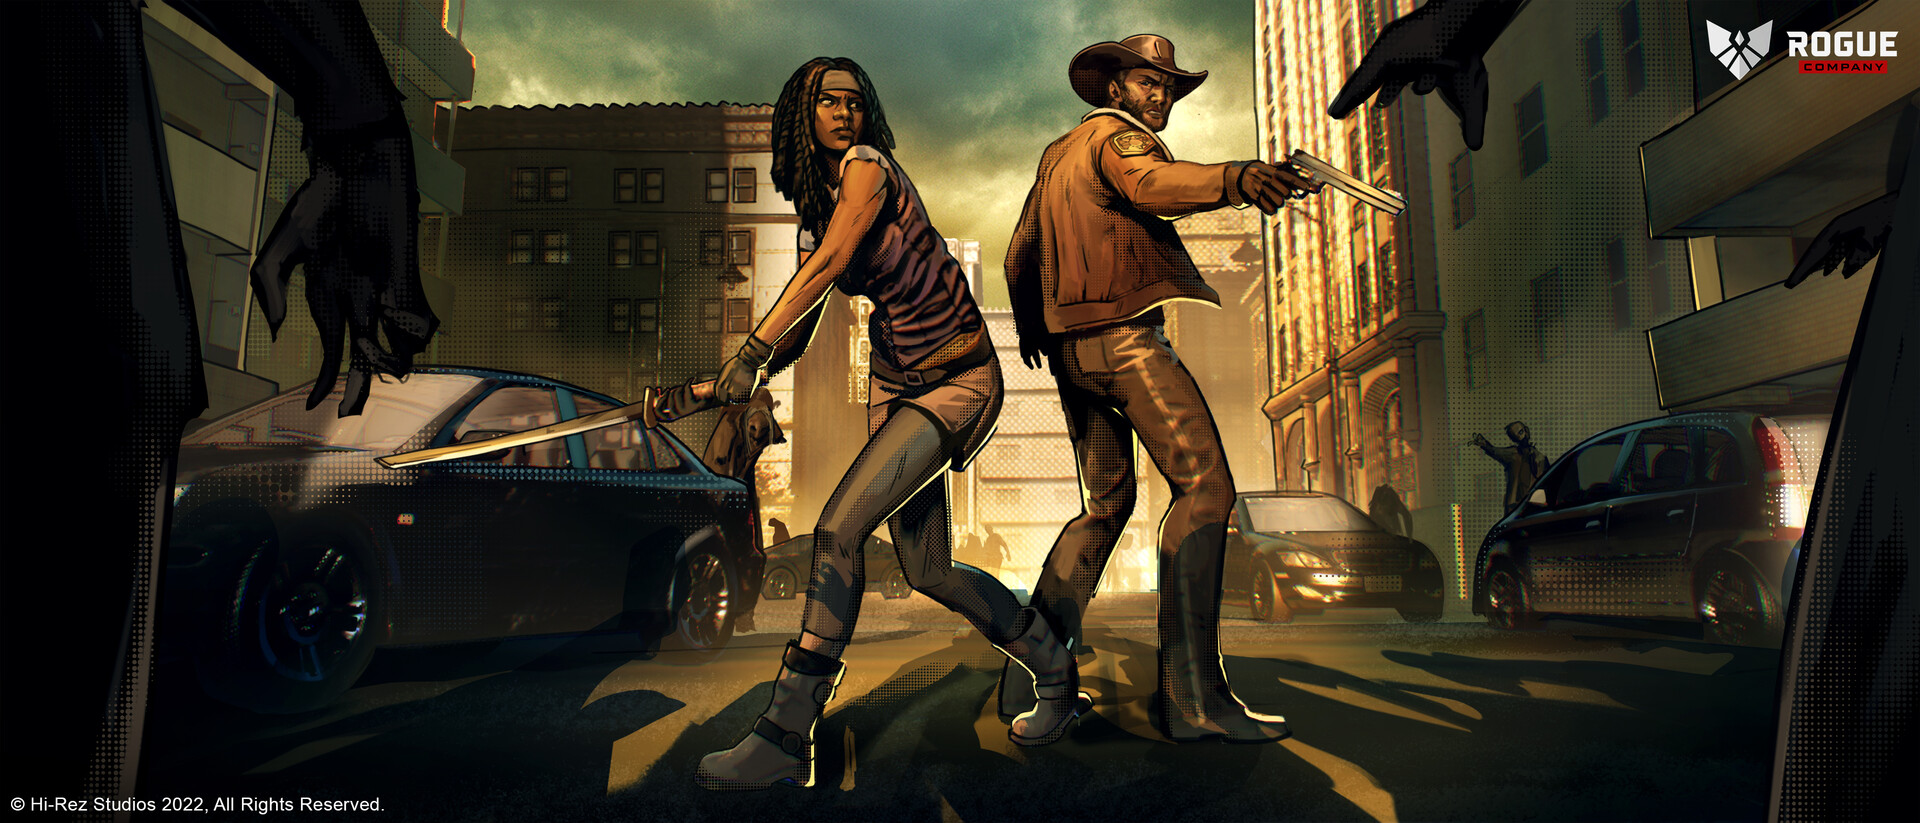 Rogue Company and The Walking Dead Crossover is Now Live